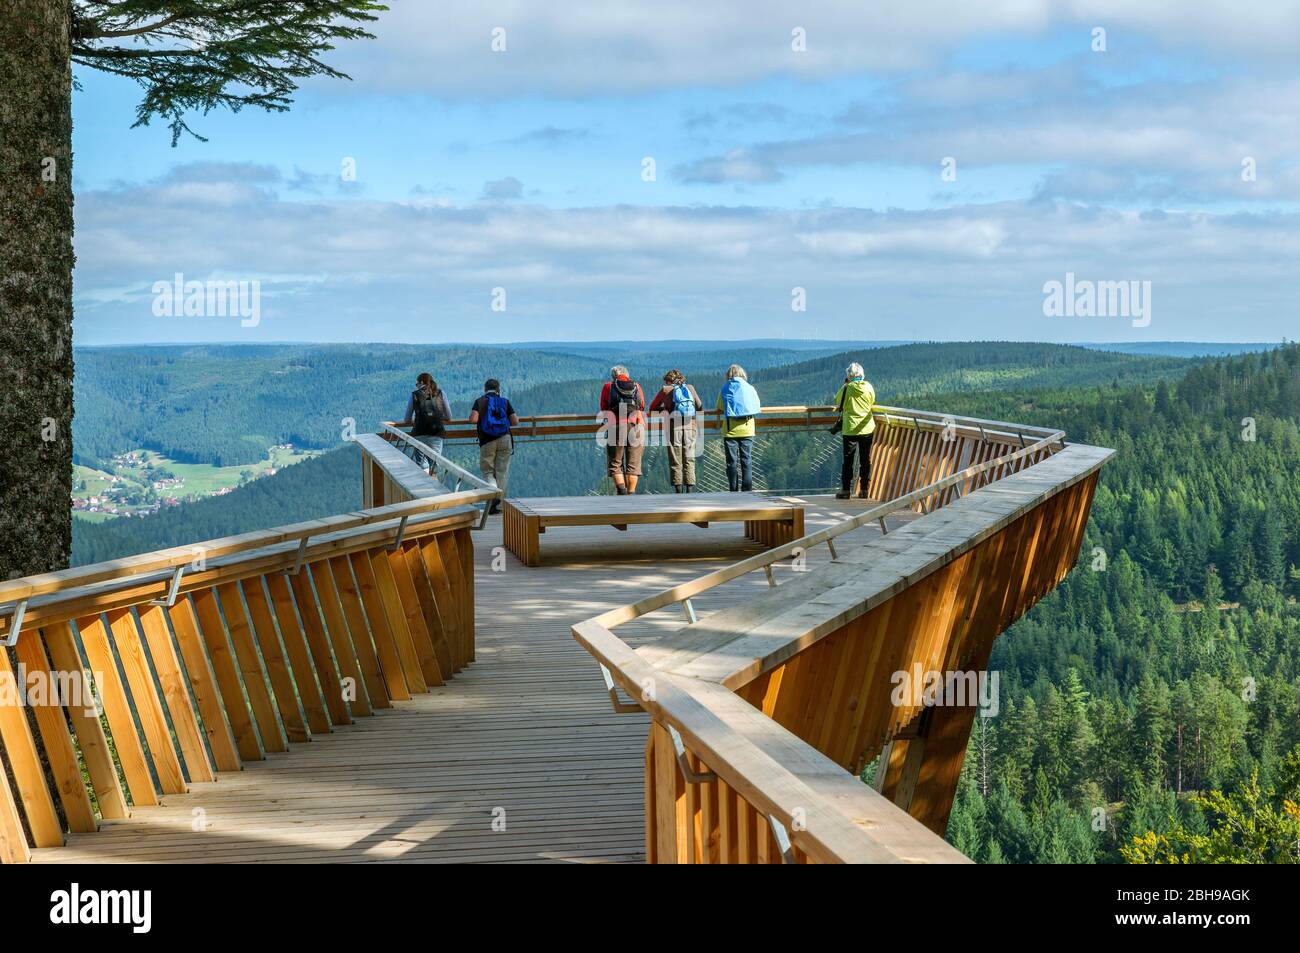 Germany, Baden-Württemberg, Freudenstadt-Kniebis, Ellbachseeblick, observation deck overlooking the Ellbachsee, a glacial Karsee in the northern Black Forest. The new observation deck, a 30m long barrier-free Douglas fir dock, 10m above the ground at the end, opened in August 2013. Stock Photo